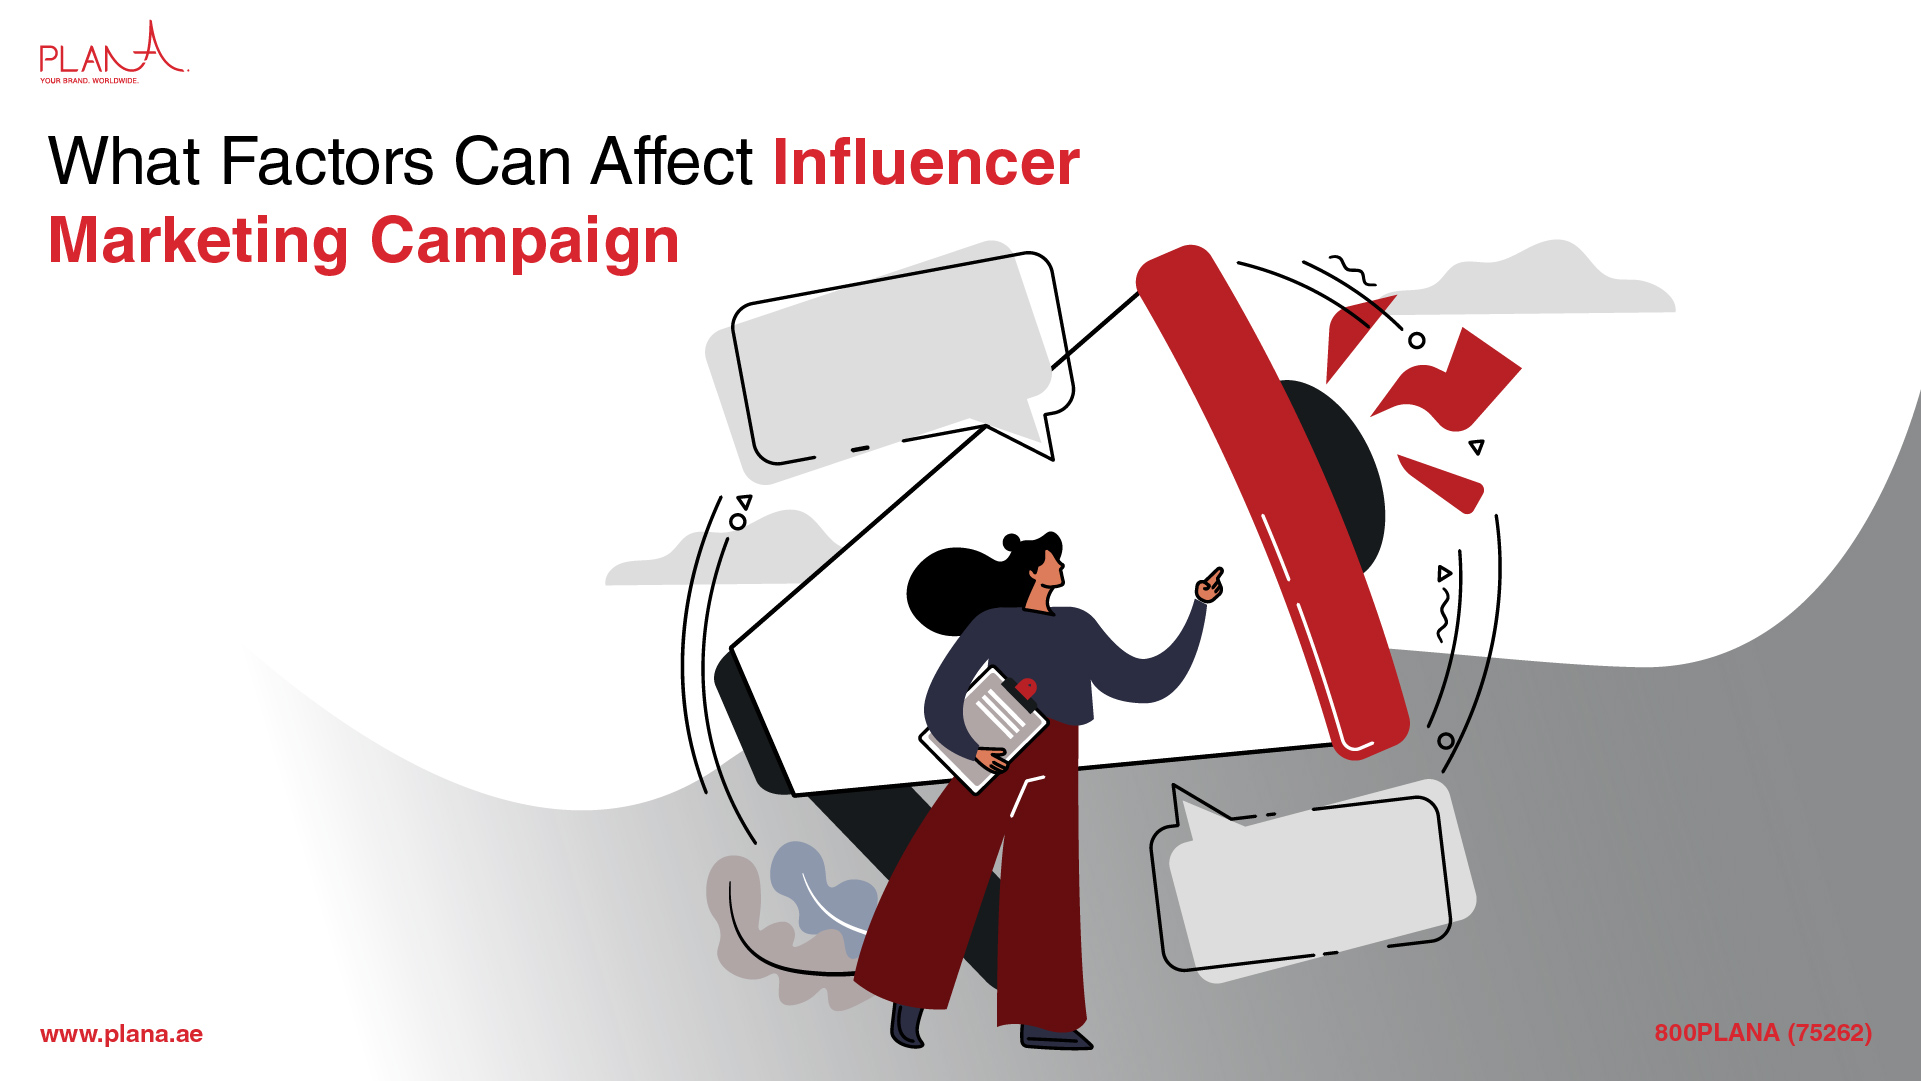 What Factors Can Affect Influencer Marketing Campaigns